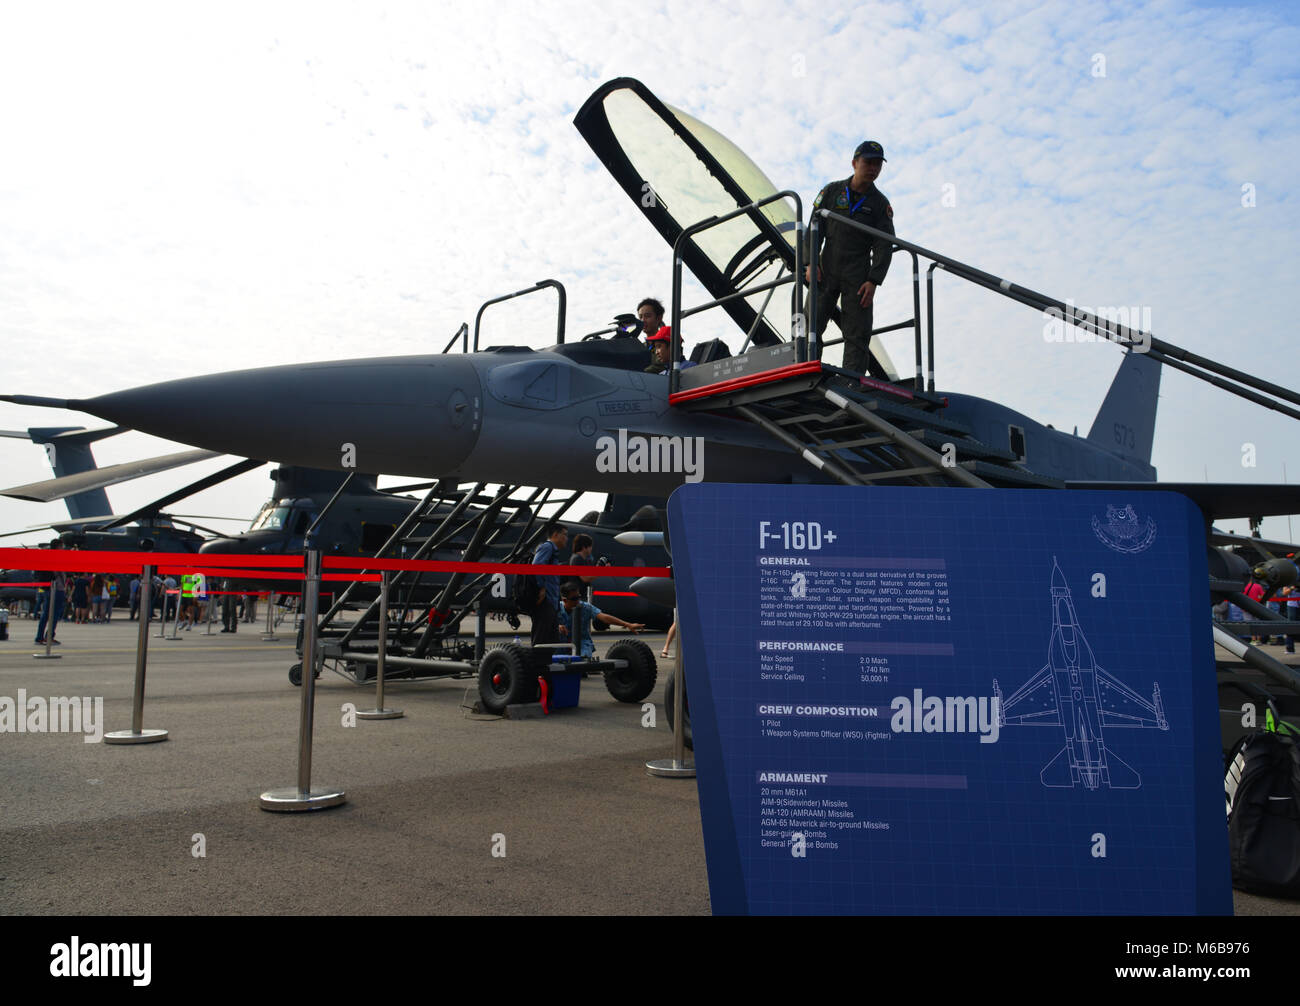 Singapore  - Feb 10, 2018. A Lockheed Martin F-16 Fighting Falcon aircraft belong to the Singapore Air Force sits on display at the 2018 Singapore Air Stock Photo